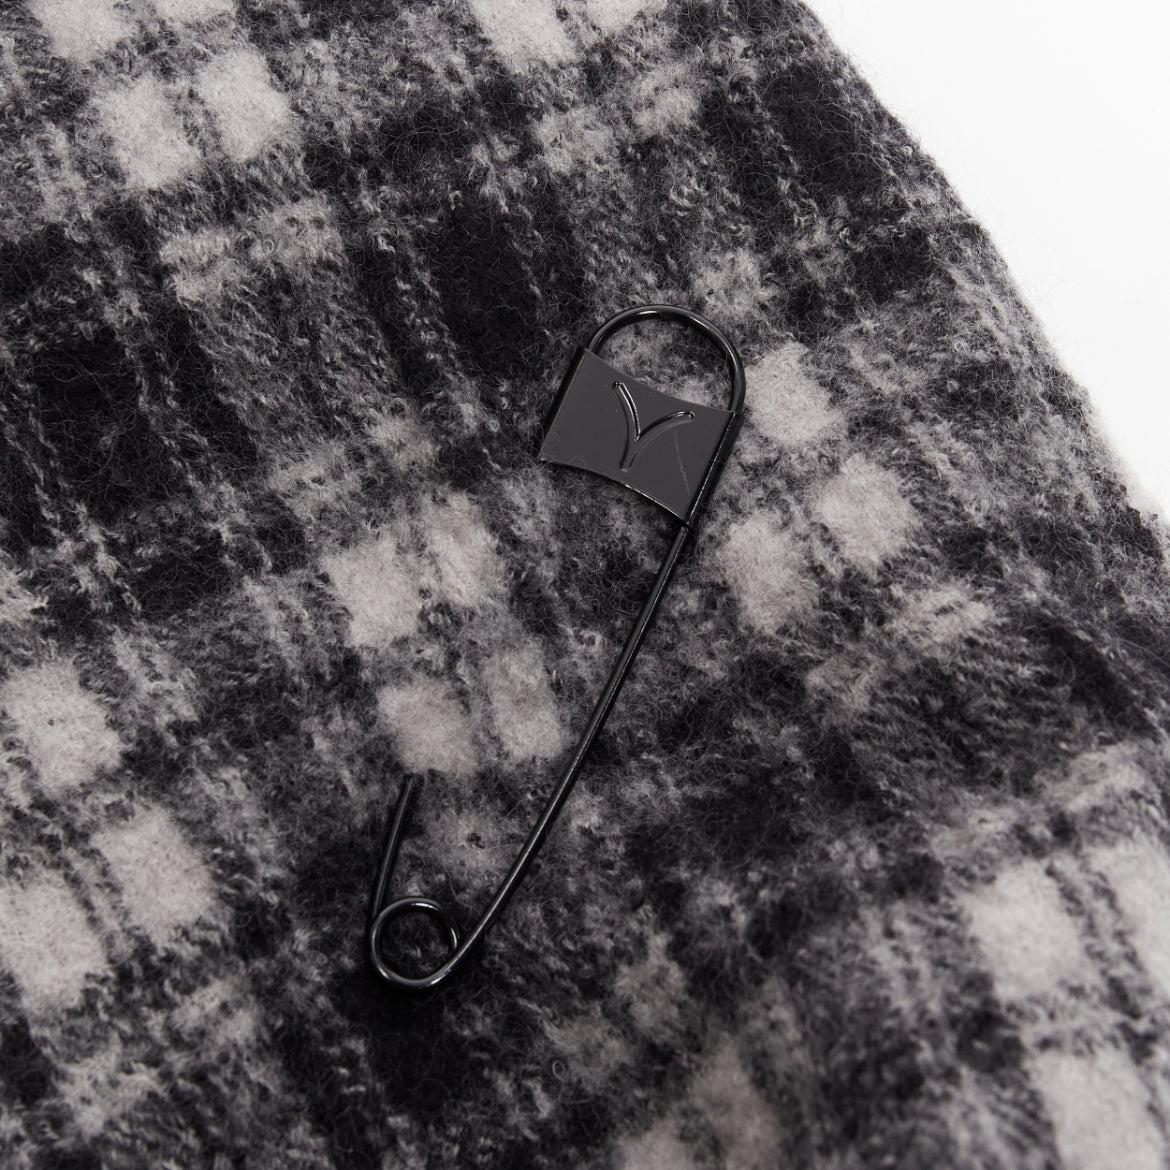 Y'S YOHJI YAMAMOTO grey 100% wool checkered black Y safety pin fringe scarf
Reference: DYTG/A00059
Brand: Y's Yohji Yamamoto
Collection: Y'S
Material: Wool
Color: Grey, Black
Pattern: Checkered
Extra Details: Y logo black metal pin.
Made in: